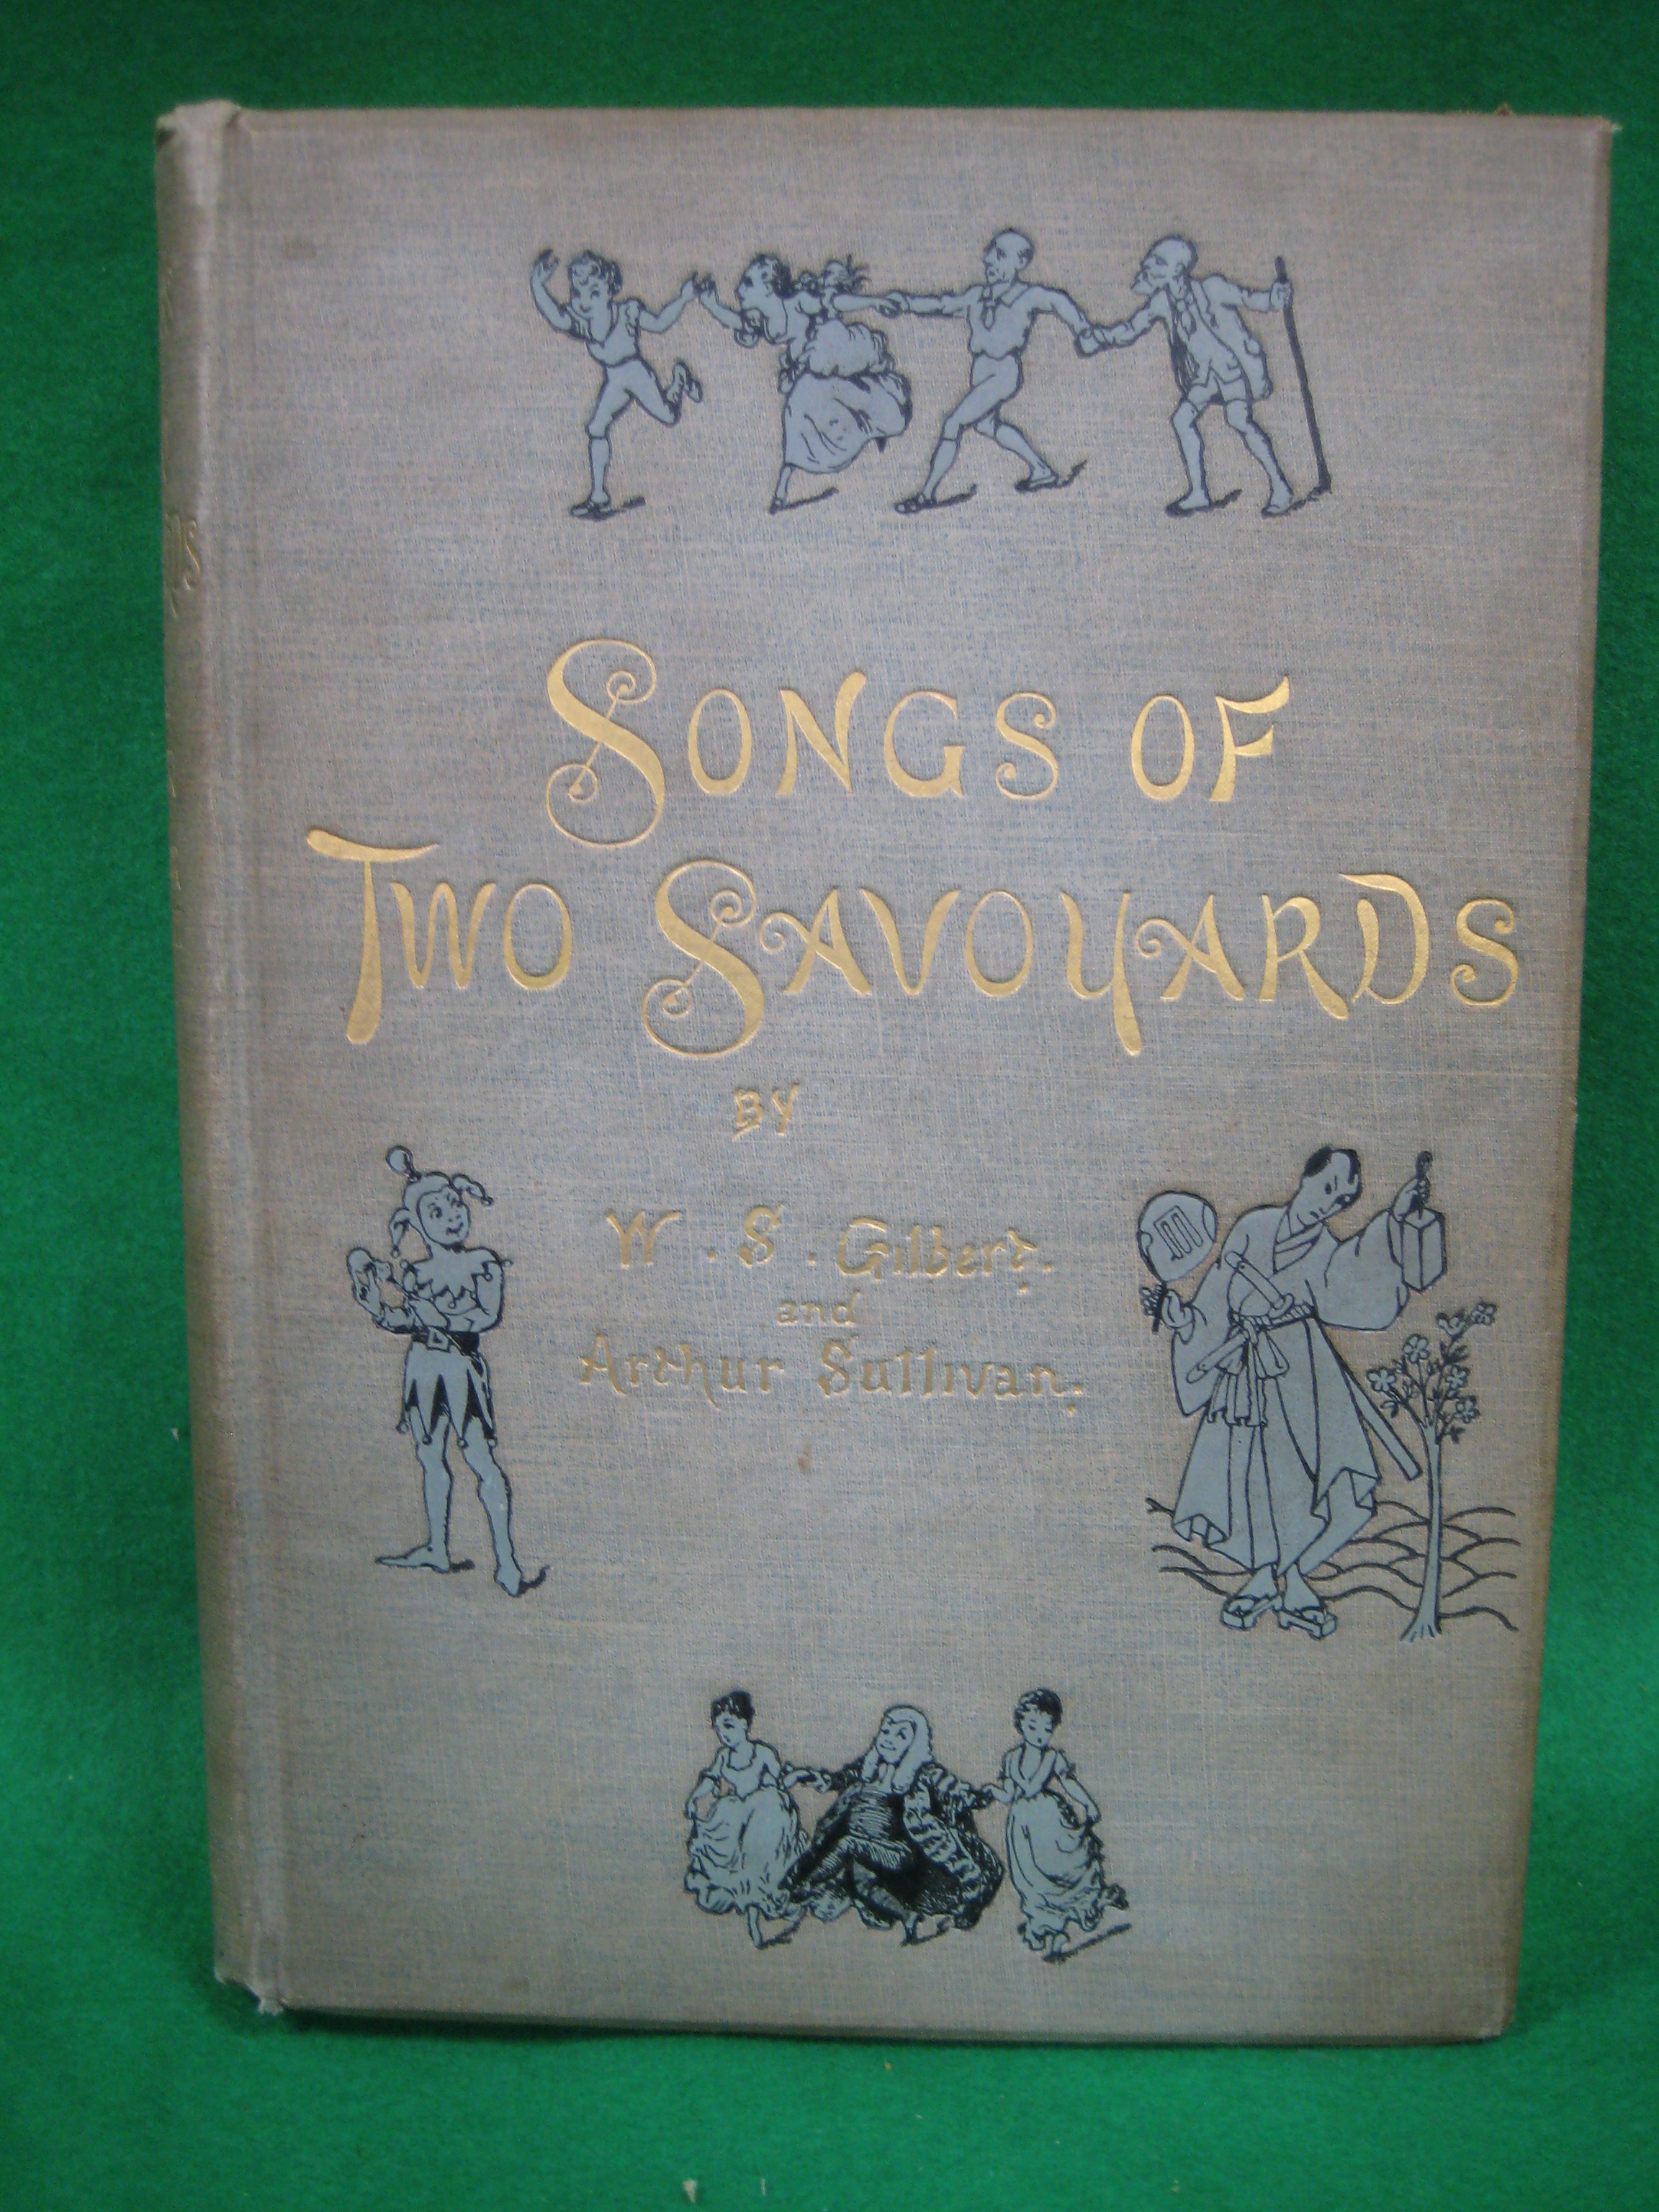 One volume Songs of two Savoyards by Gilbert and Sullivan, 1892.